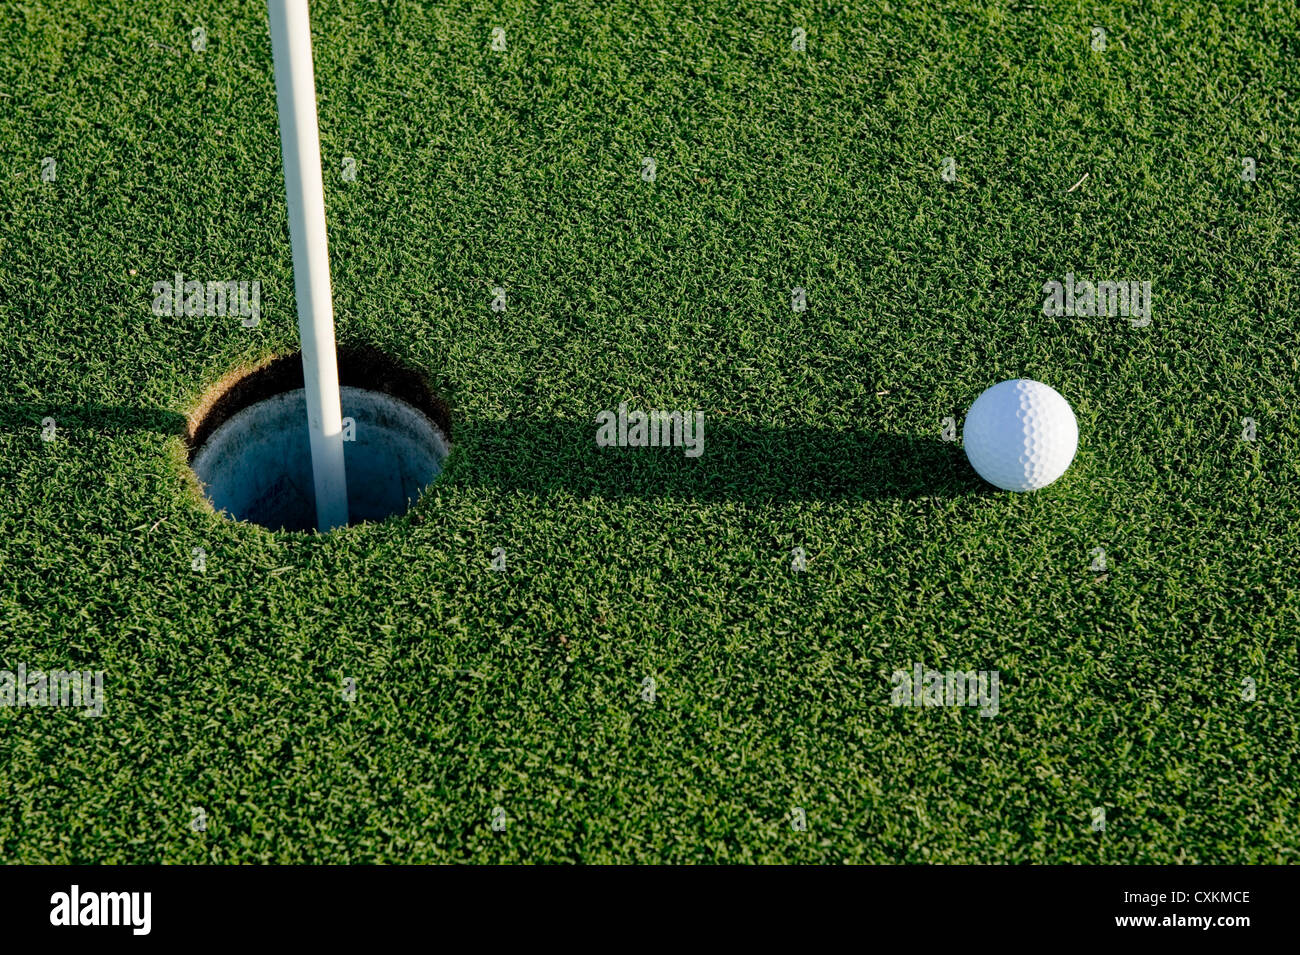 A white golf ball near the hole of a golfing green or course Stock Photo